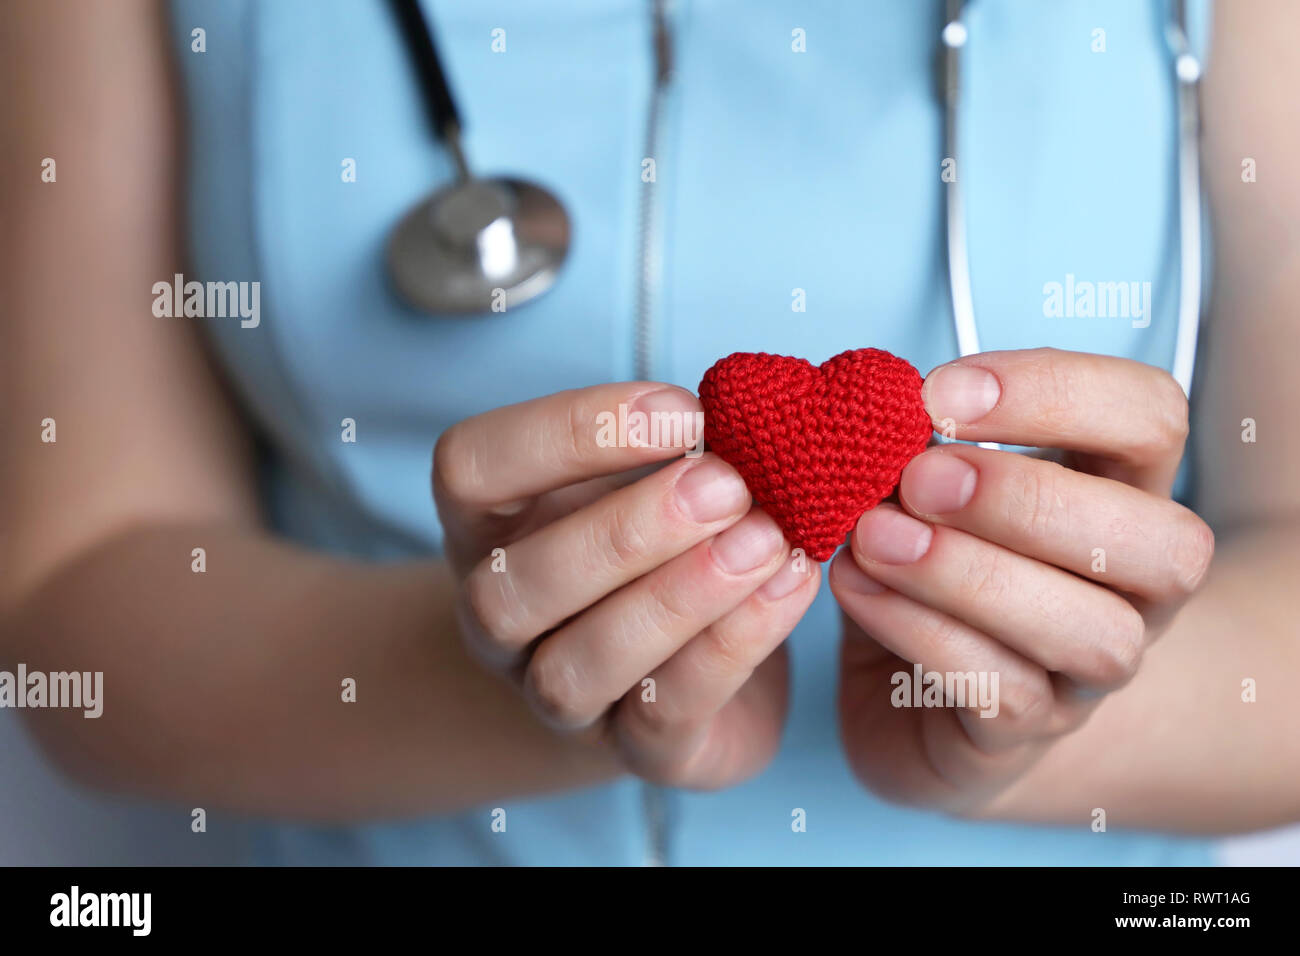 Cardiology and health care, woman doctor holding red knitted heart in hands. Concept of cardiologist, treatment of heart disease in the clinic Stock Photo